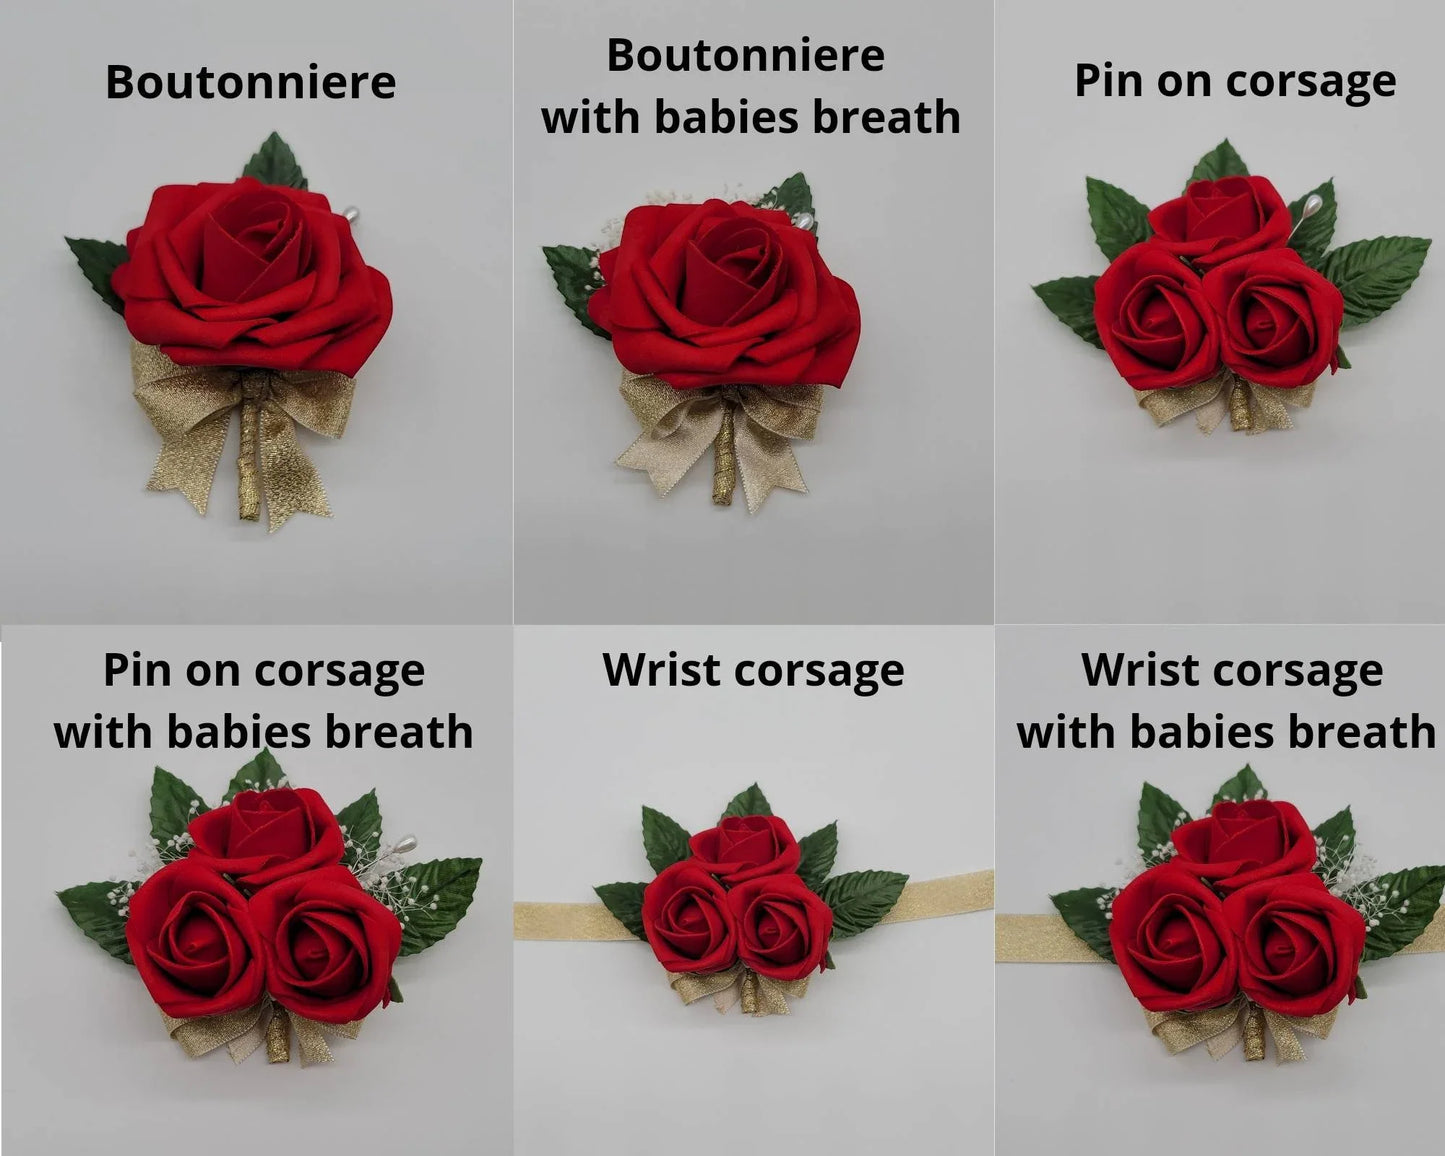 Red and White Boutonnieres and Corsages